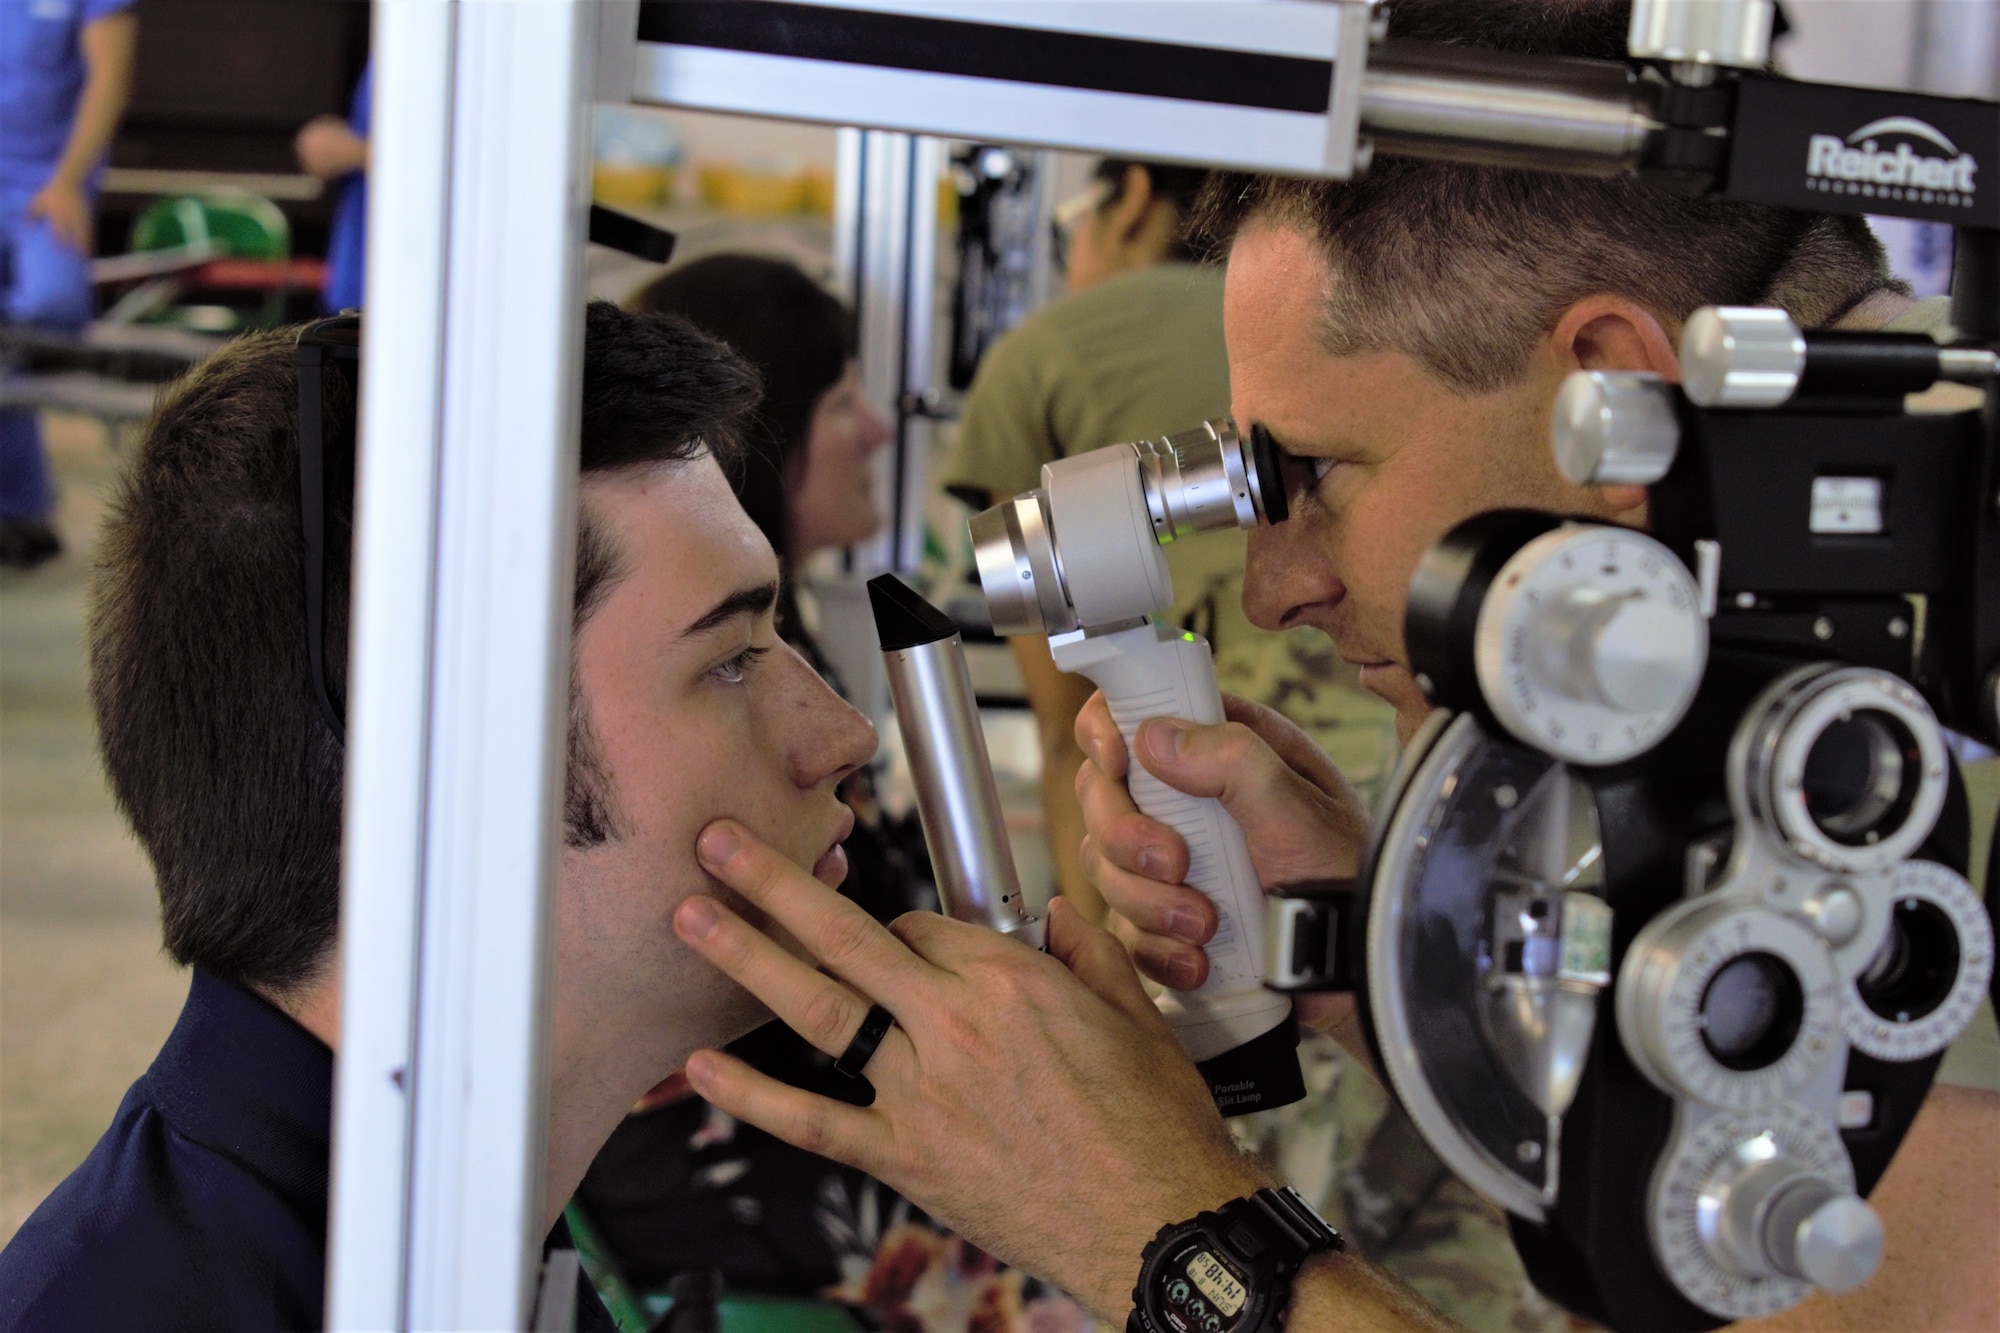 Maj. Joshua Metzger, optometrist, 127th Medical Group, Selfridge Air National Guard Base, Mich., examines a patient during Innovative Readiness Training Appalachian Care 2019 at Wise County Fairgrounds, Wise, Va., Aug. 18, 2019. Appalachian Care Innovative Readiness Training 2019 takes place Aug. 16-29, 2019, to care for the medically underserved communities of Wise, Virginia while simultaneously conducting deployment and readiness training for military personnel. Innovative Readiness Training is the only hands-on training opportunity authorized to operate within the U.S. During Appalachian Care IRT 2019, medical operations will be staged at one physical location at Wise County Fairgrounds. The Appalachian Care IRT 2019 team provides medical, dental, optometry and veterinary care to assist local health and municipal authorities in addressing underserved and unmet community health and civic needs. Units also conduct critical mission training and logistical movement in order to simulate hands-on deployment readiness operations and health care delivery in the time of crisis, conflict or disaster. (Air National Guard photo by 1st Lt. Andrew Layton)